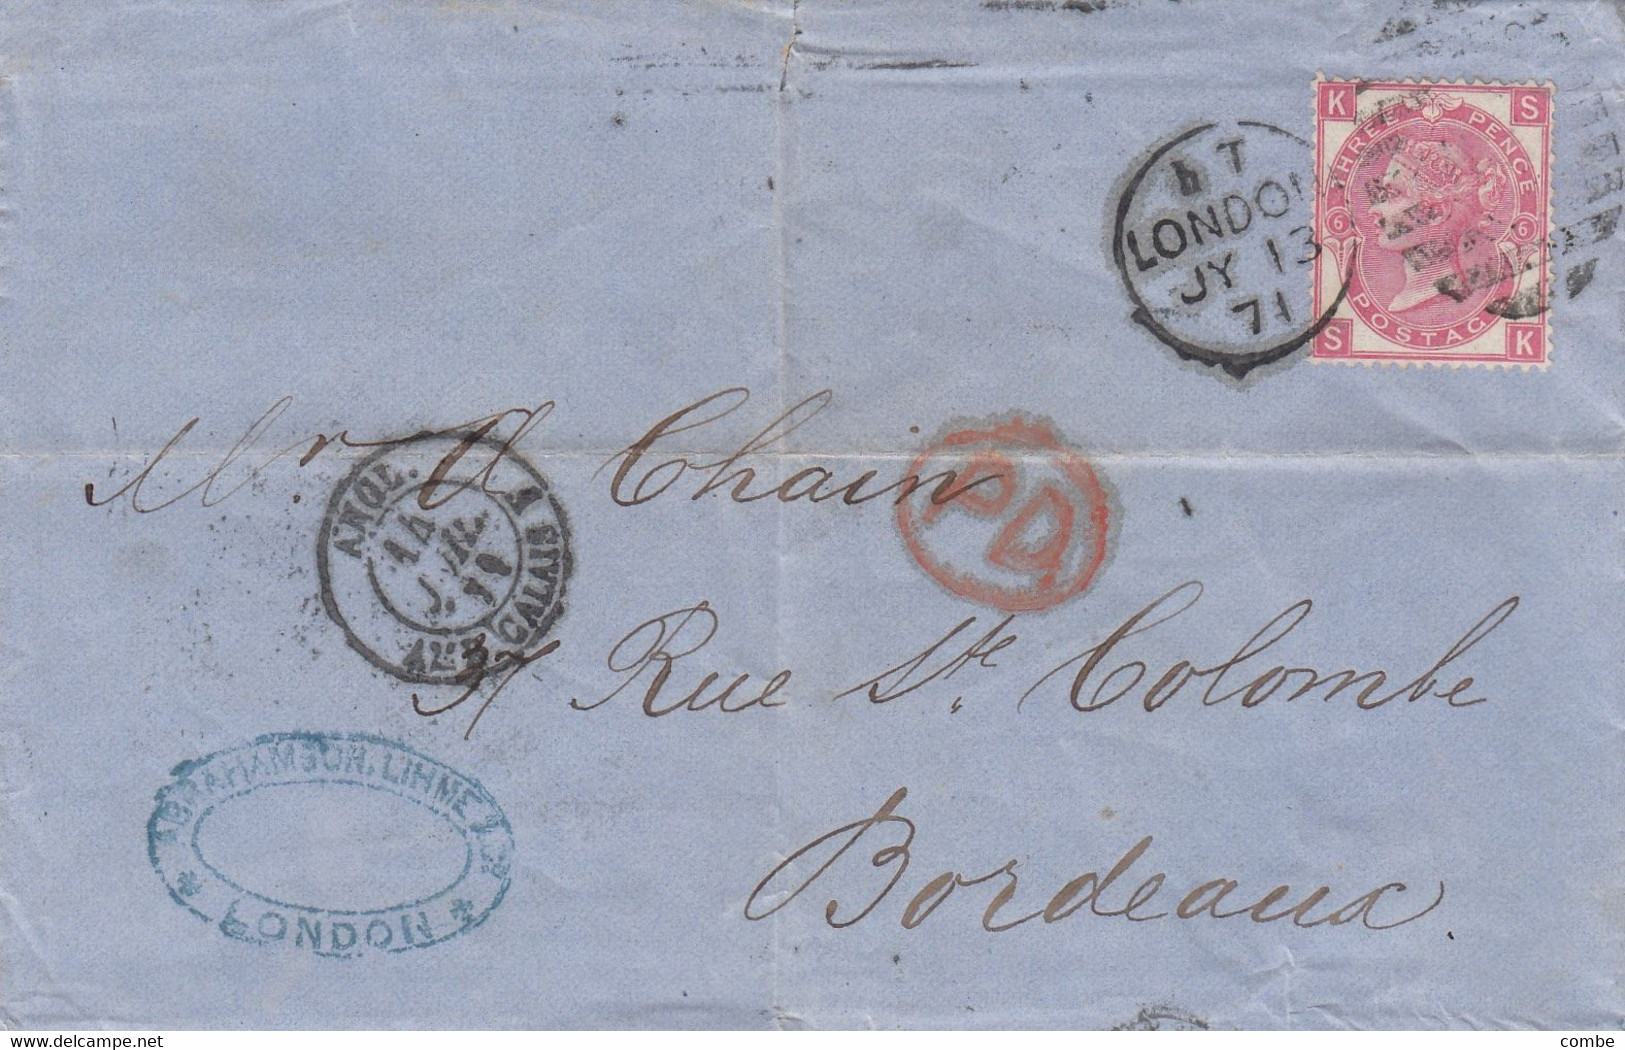 COVER. LONDON. 13 JY 71. TO BORDEAUX. VICTORIA THREE PENCE. KS. PLANCHE 6. PD. ANGL AMB CALAIS - Ohne Zuordnung